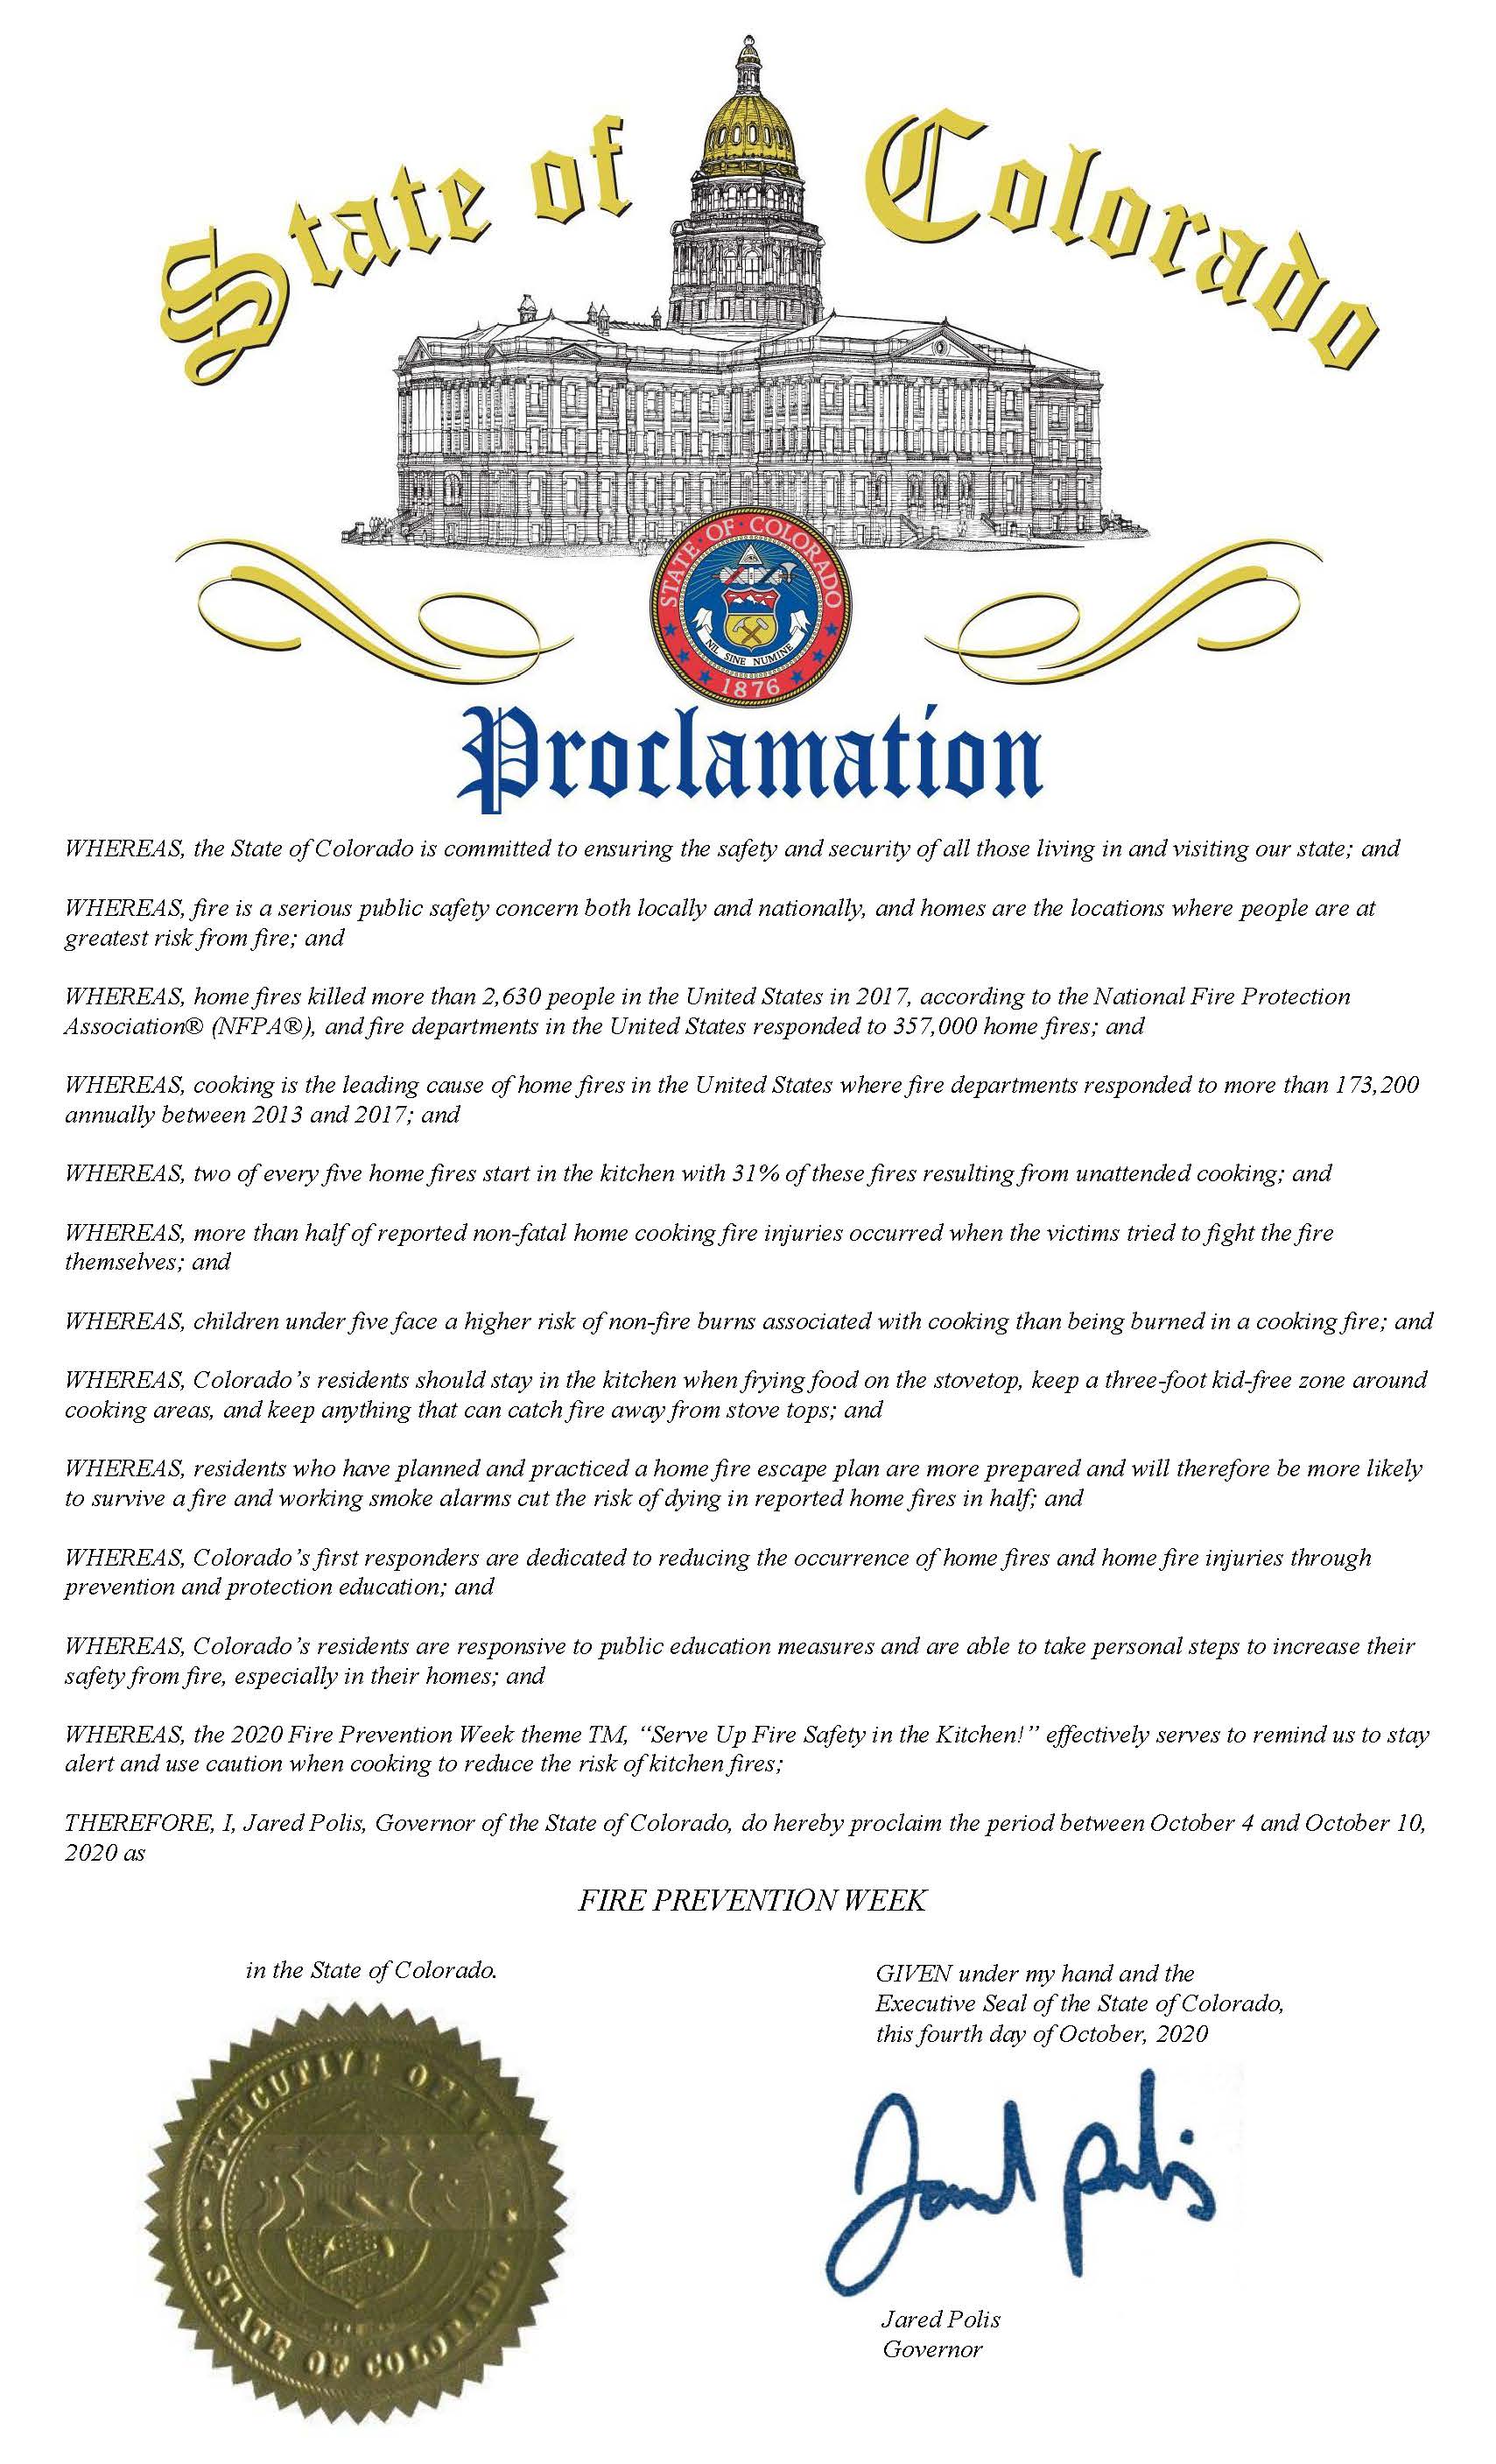 Example of proclamation language,  WHEREAS, the State of Colorado is committed to ensuring the safety and security of all those living in and visiting our state; and WHEREAS, fire is a serious public safety concern both locally and nationally, and homes are the locations where people are at greatest risk from fire; and WHEREAS, home fires killed more than 2,630 people in the United States in 2017, according to the National Fire Protection Association® (NFPA®), and fire departments in the United States responded to 357,000 home fires; and WHEREAS, cooking is the leading cause of home fires in the United States where fire departments responded to more than 173,200 annually between 2013 and 2017; and WHEREAS, two of every five home fires start in the kitchen with 31% of these fires resulting from unattended cooking; and WHEREAS, more than half of reported non-fatal home cooking fire injuries occurred when the victims tried to fight the fire themselves; and WHEREAS, children under five face a higher risk of non-fire burns associated with cooking than being burned in a cooking fire; and WHEREAS, Colorado’s residents should stay in the kitchen when frying food on the stovetop, keep a three-foot kid-free zone around cooking areas, and keep anything that can catch fire away from stove tops; and WHEREAS, residents who have planned and practiced a home fire escape plan are more prepared and will therefore be more likely to survive a fire and working smoke alarms...